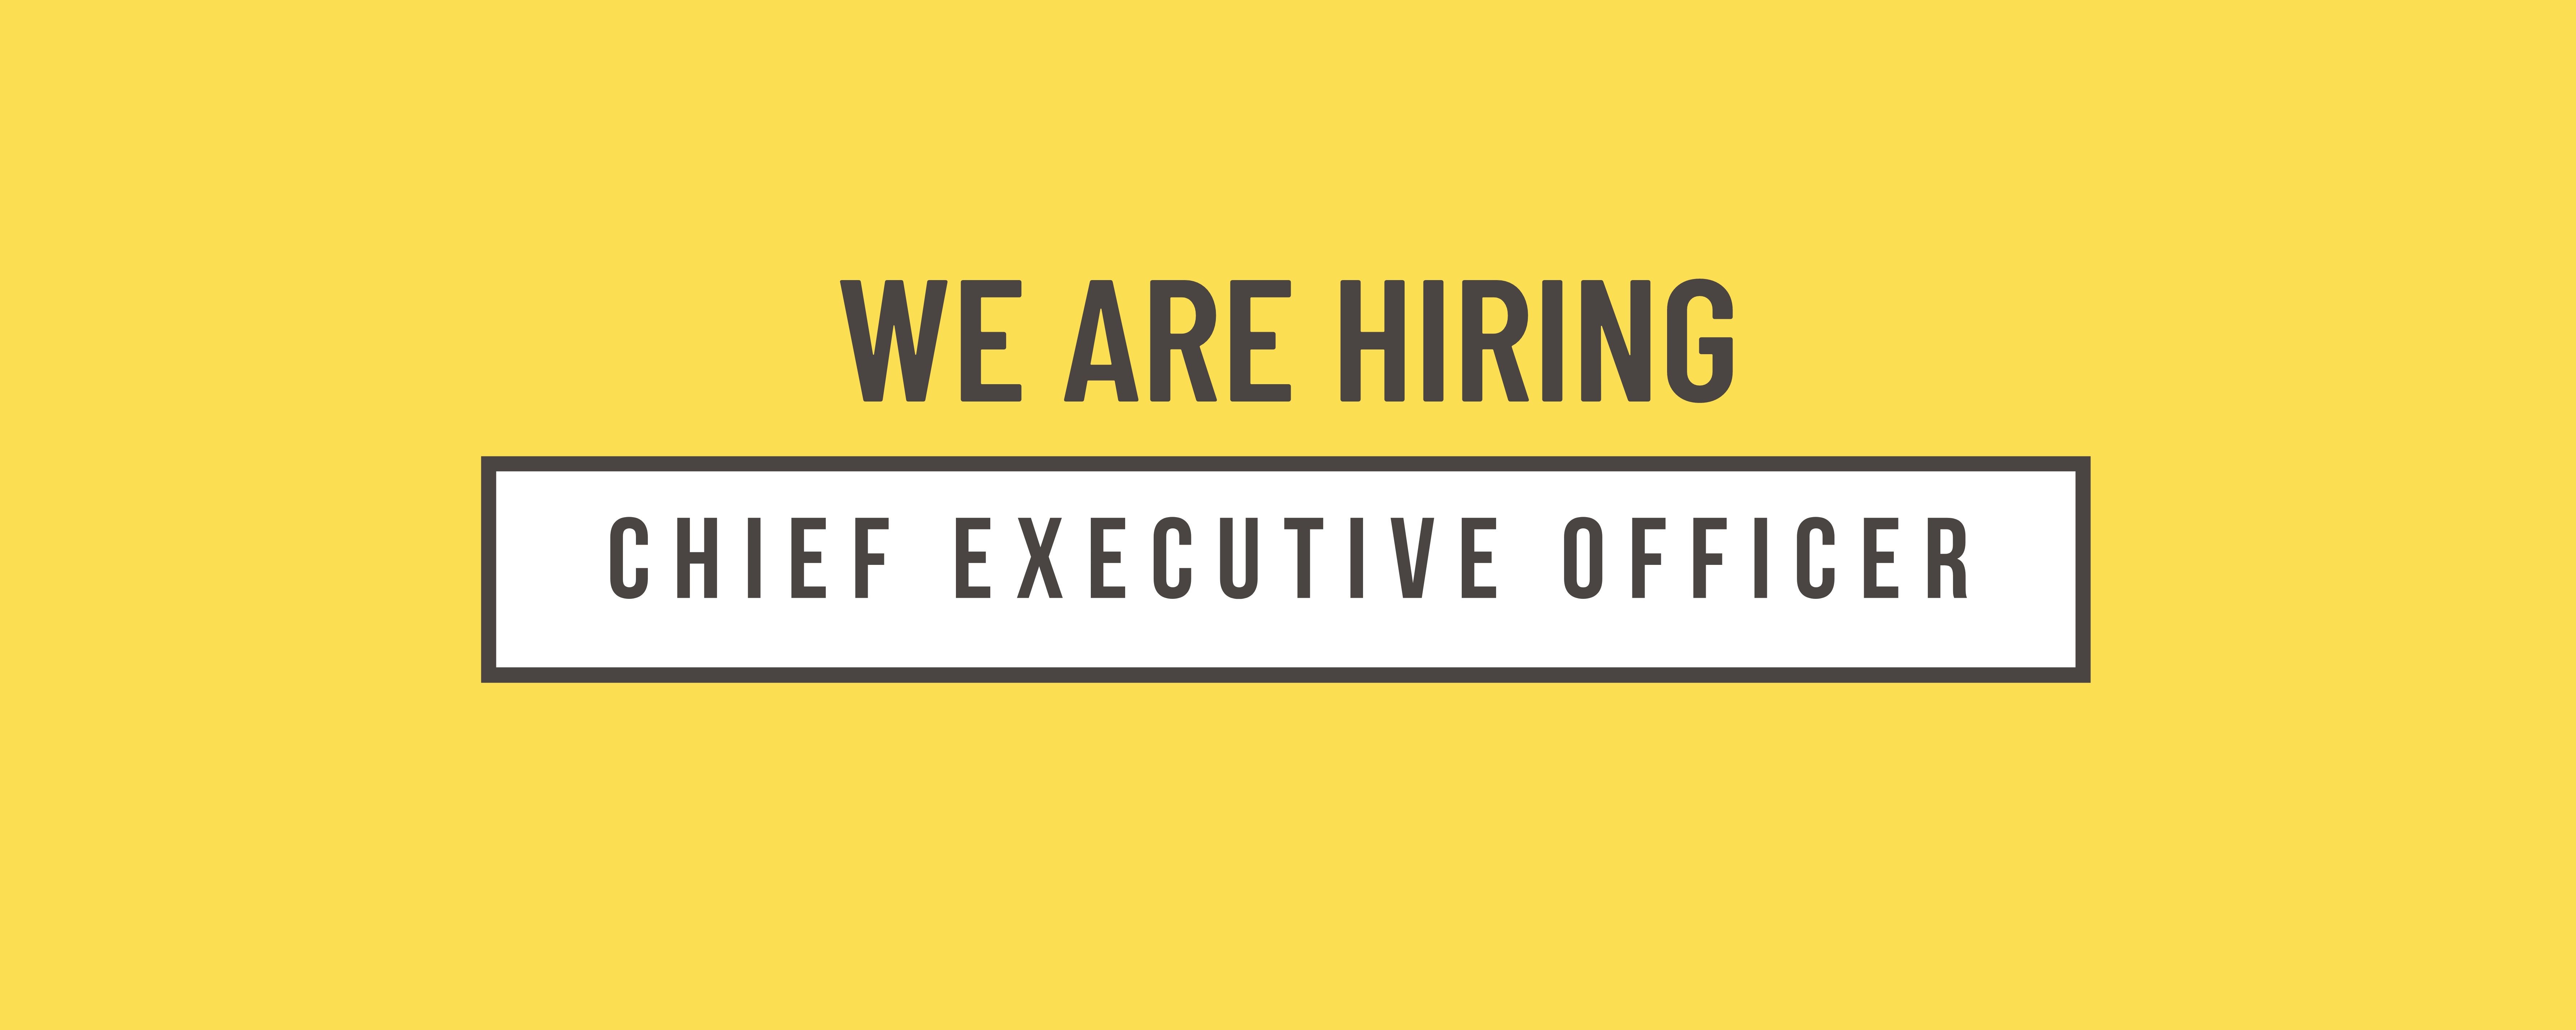 We're hiring Chief Executive Officer black text on yellow background